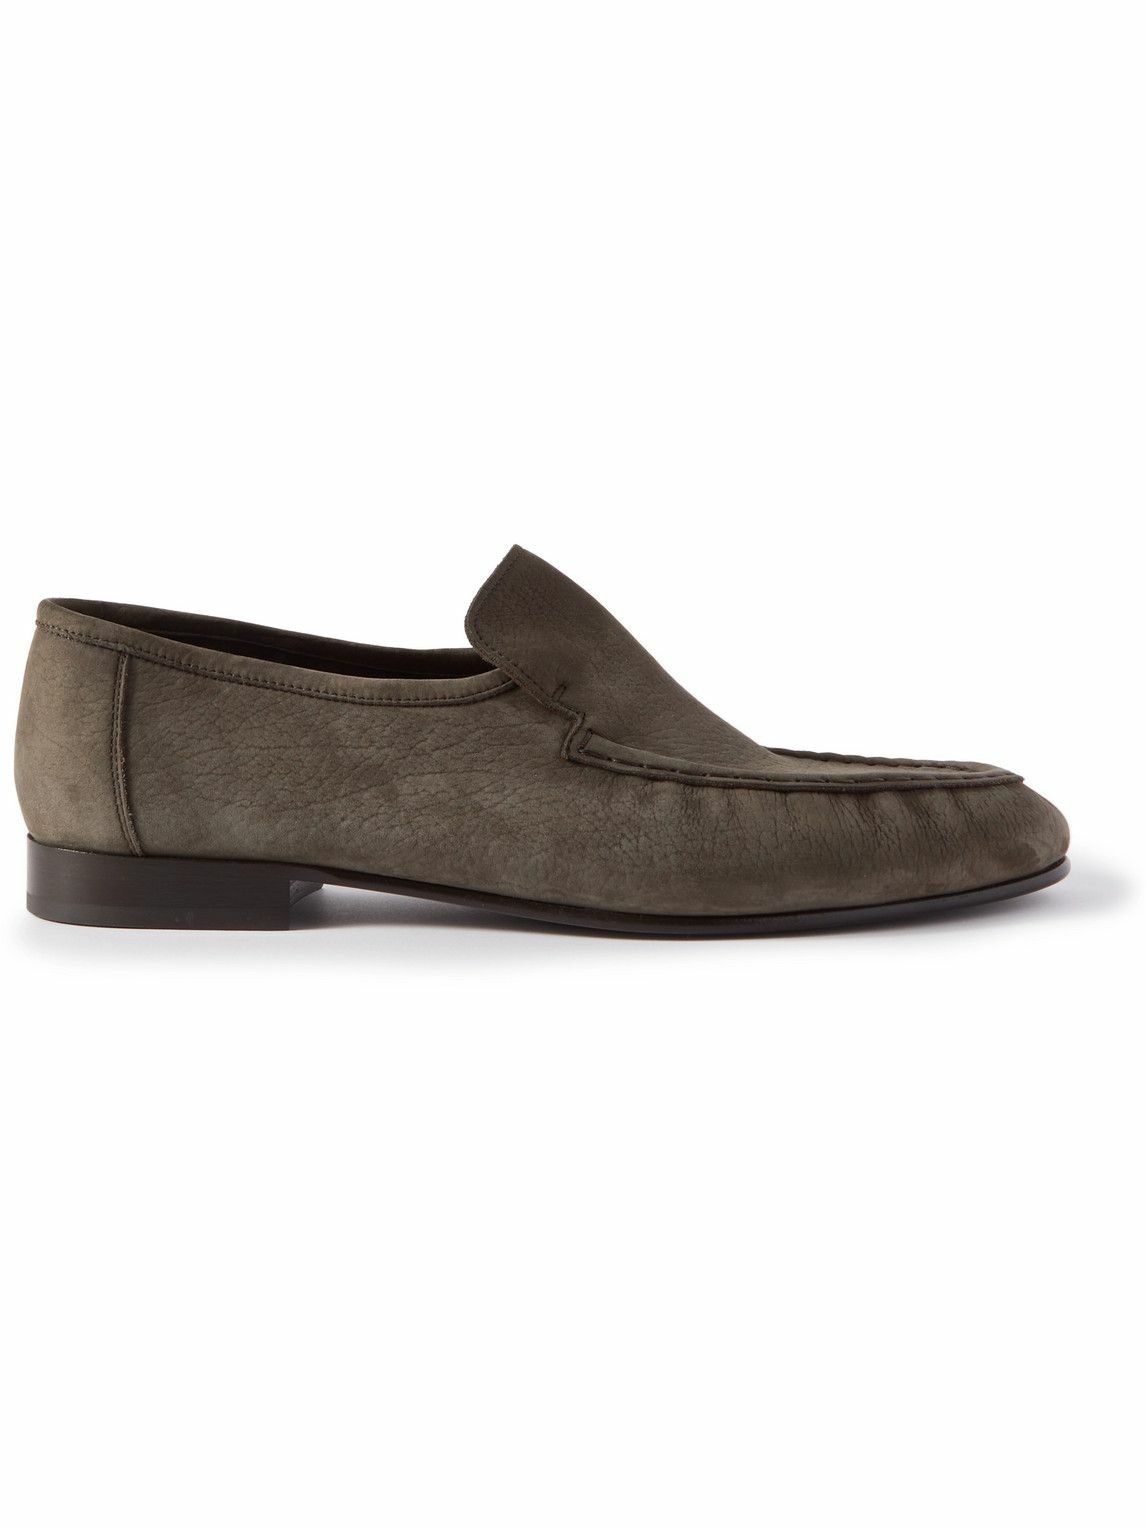 The Row - Emerson Nubuck Loafers - Brown The Row